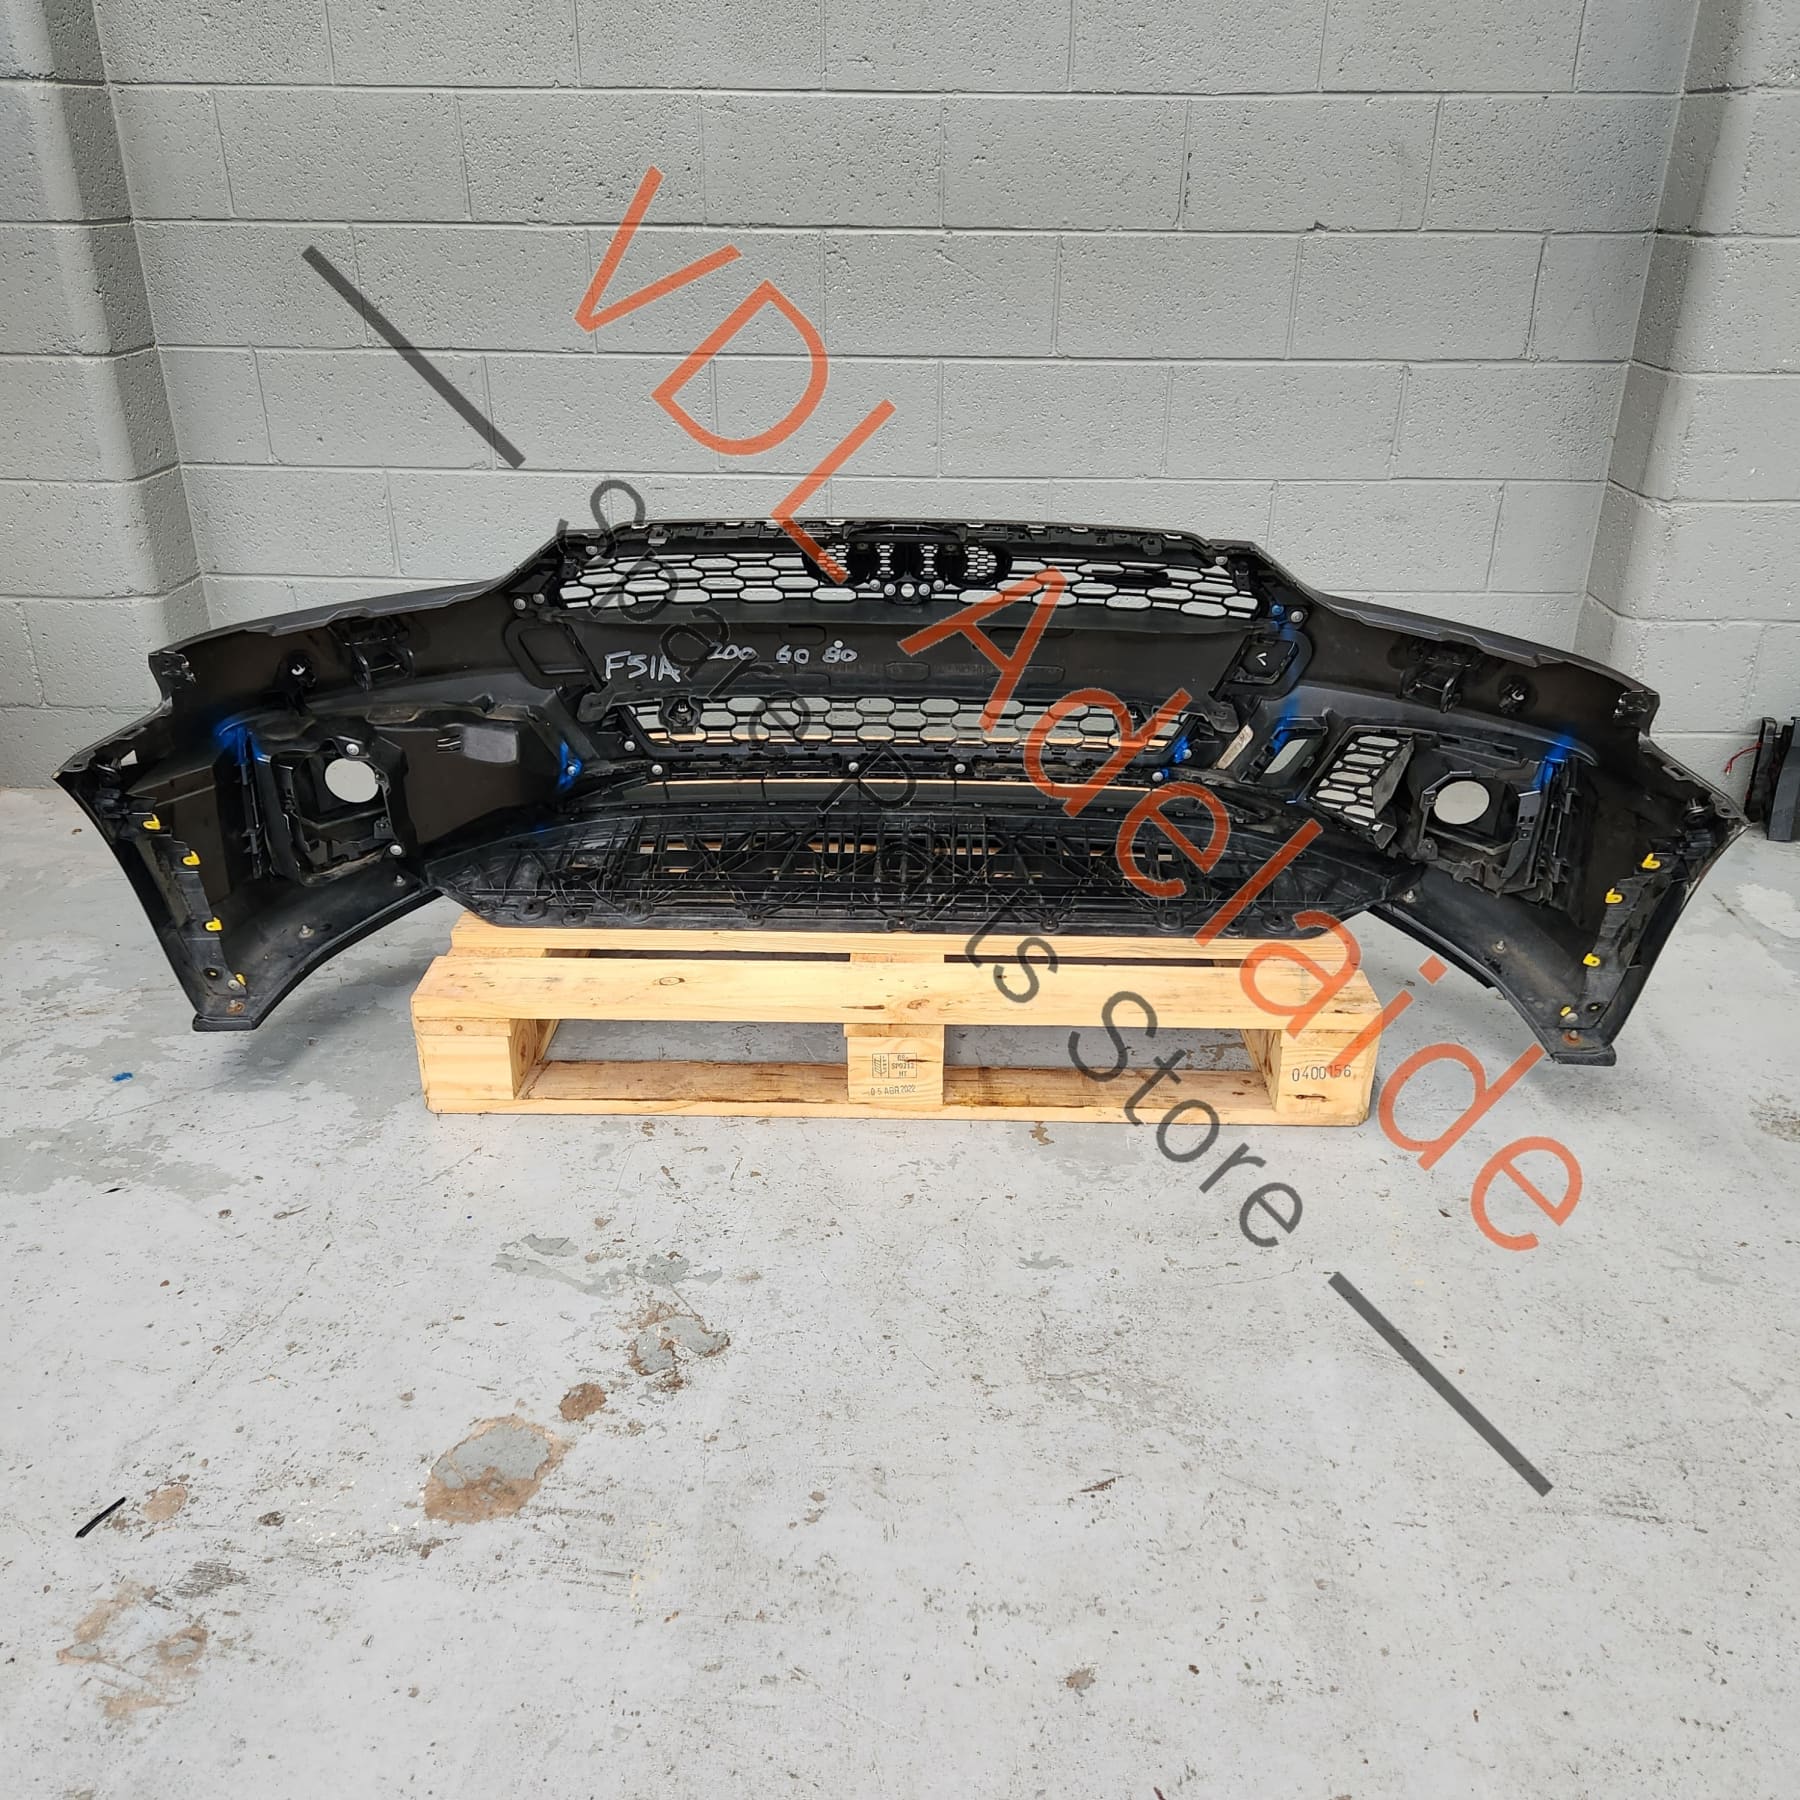 Audi RS5 Whole Front Bumper Clip Assembly w Grilles & Carbon Upgrade 8W6807065NGRU